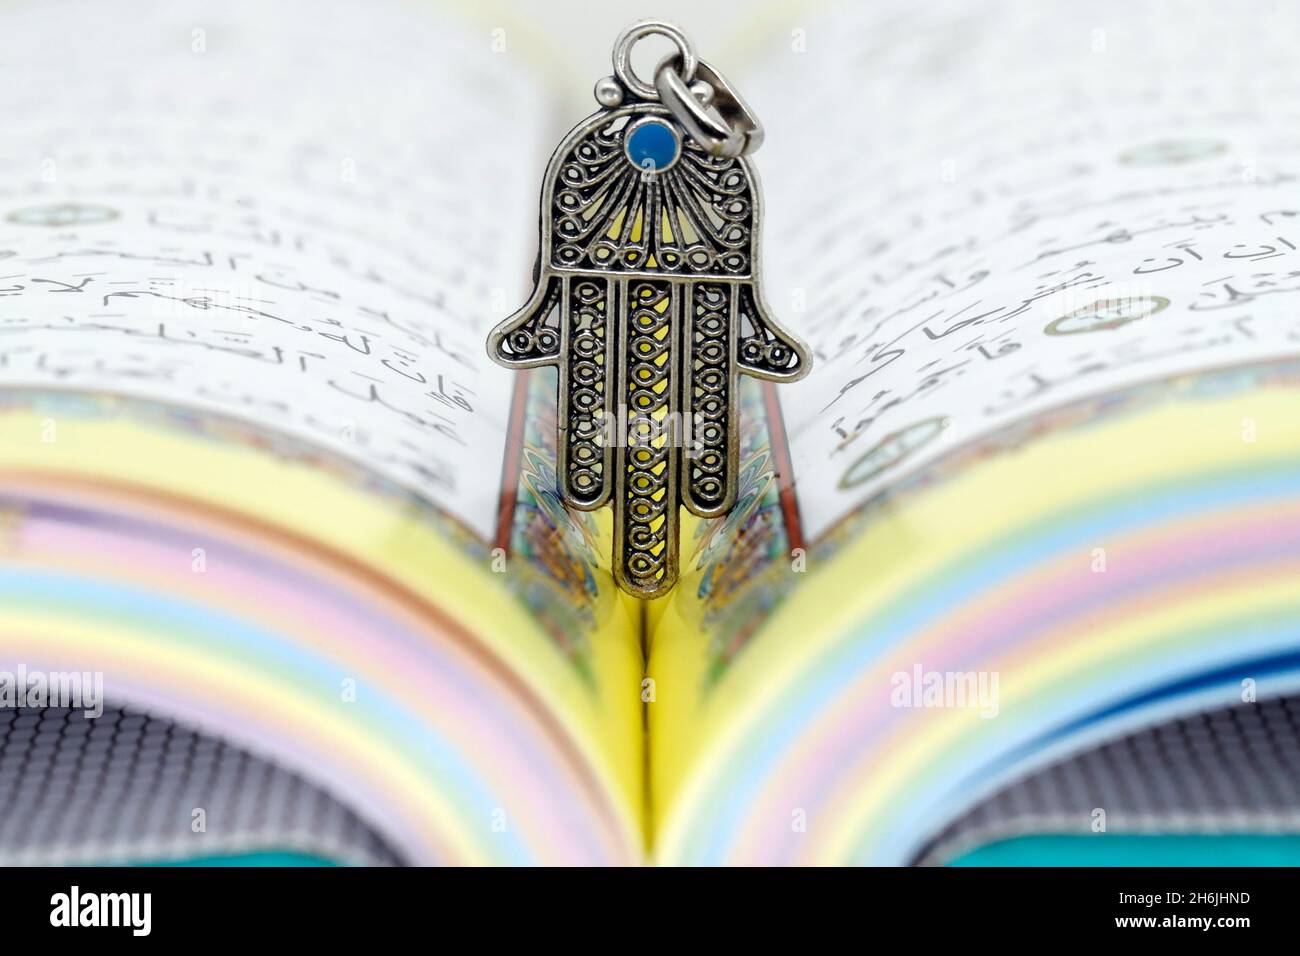 Open Holy Quran with Hamsa (Hand of Fatima) symbols of Muslim faith and religion, France, Europe Stock Photo